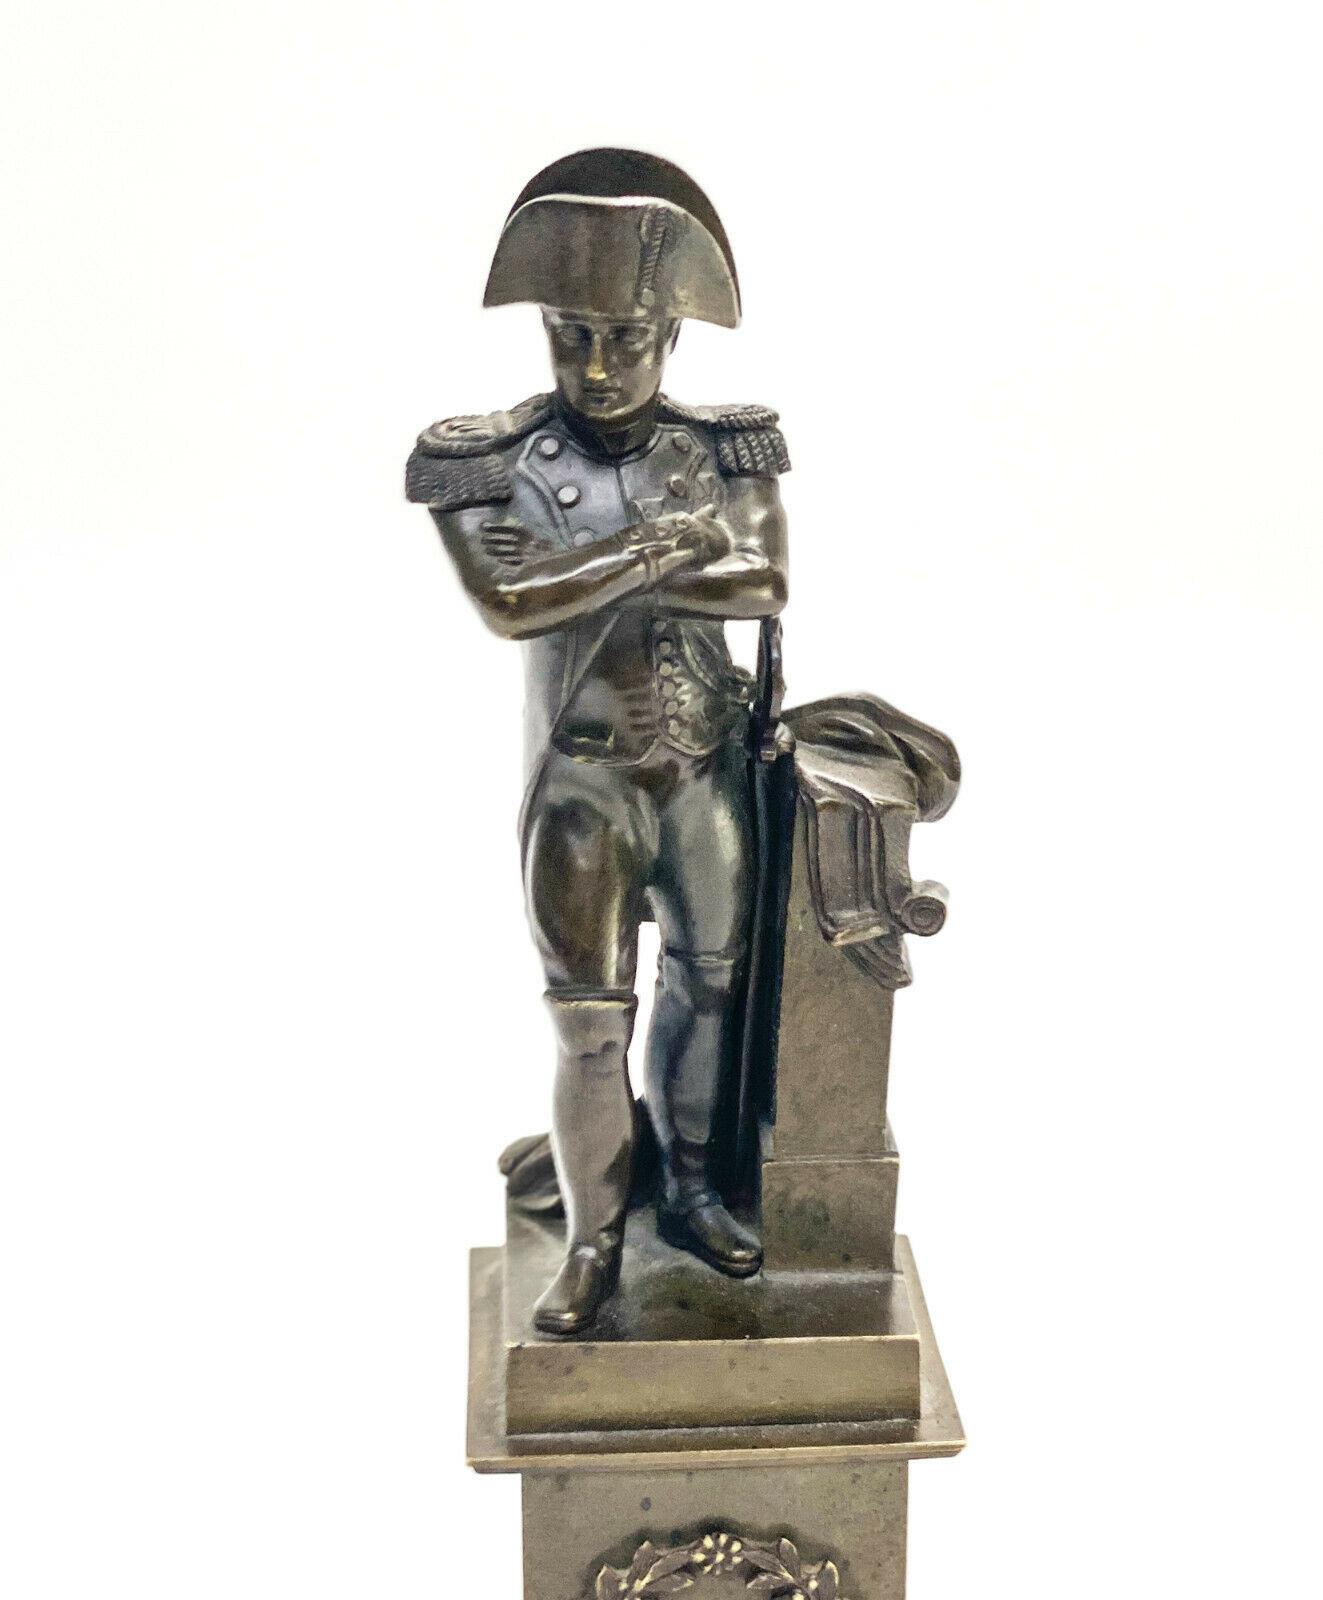 French patinated bronze Napoleon Bonaparte Miniature sculpture, 19th century

The figurine depicts Napoleon in his military garbs and in a commanding stance. The adjustable sword could be tilted inward or by his side.

Additional